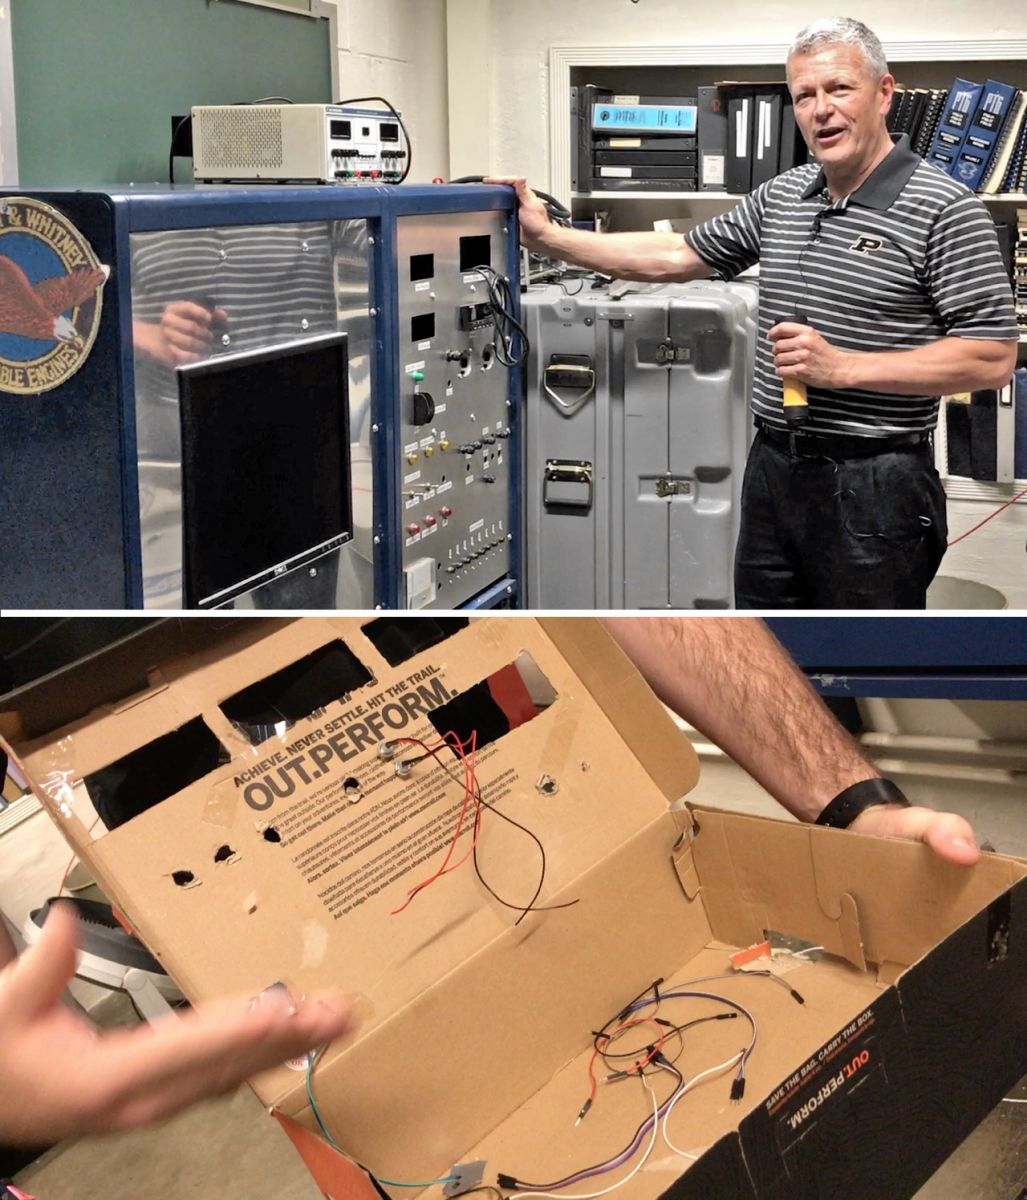 Top: Mike Davis points to racks of old equipment replaced by the microcontroller. Bottom: Gear inside the original shoebox prototype was relocated to a metal enclosure.